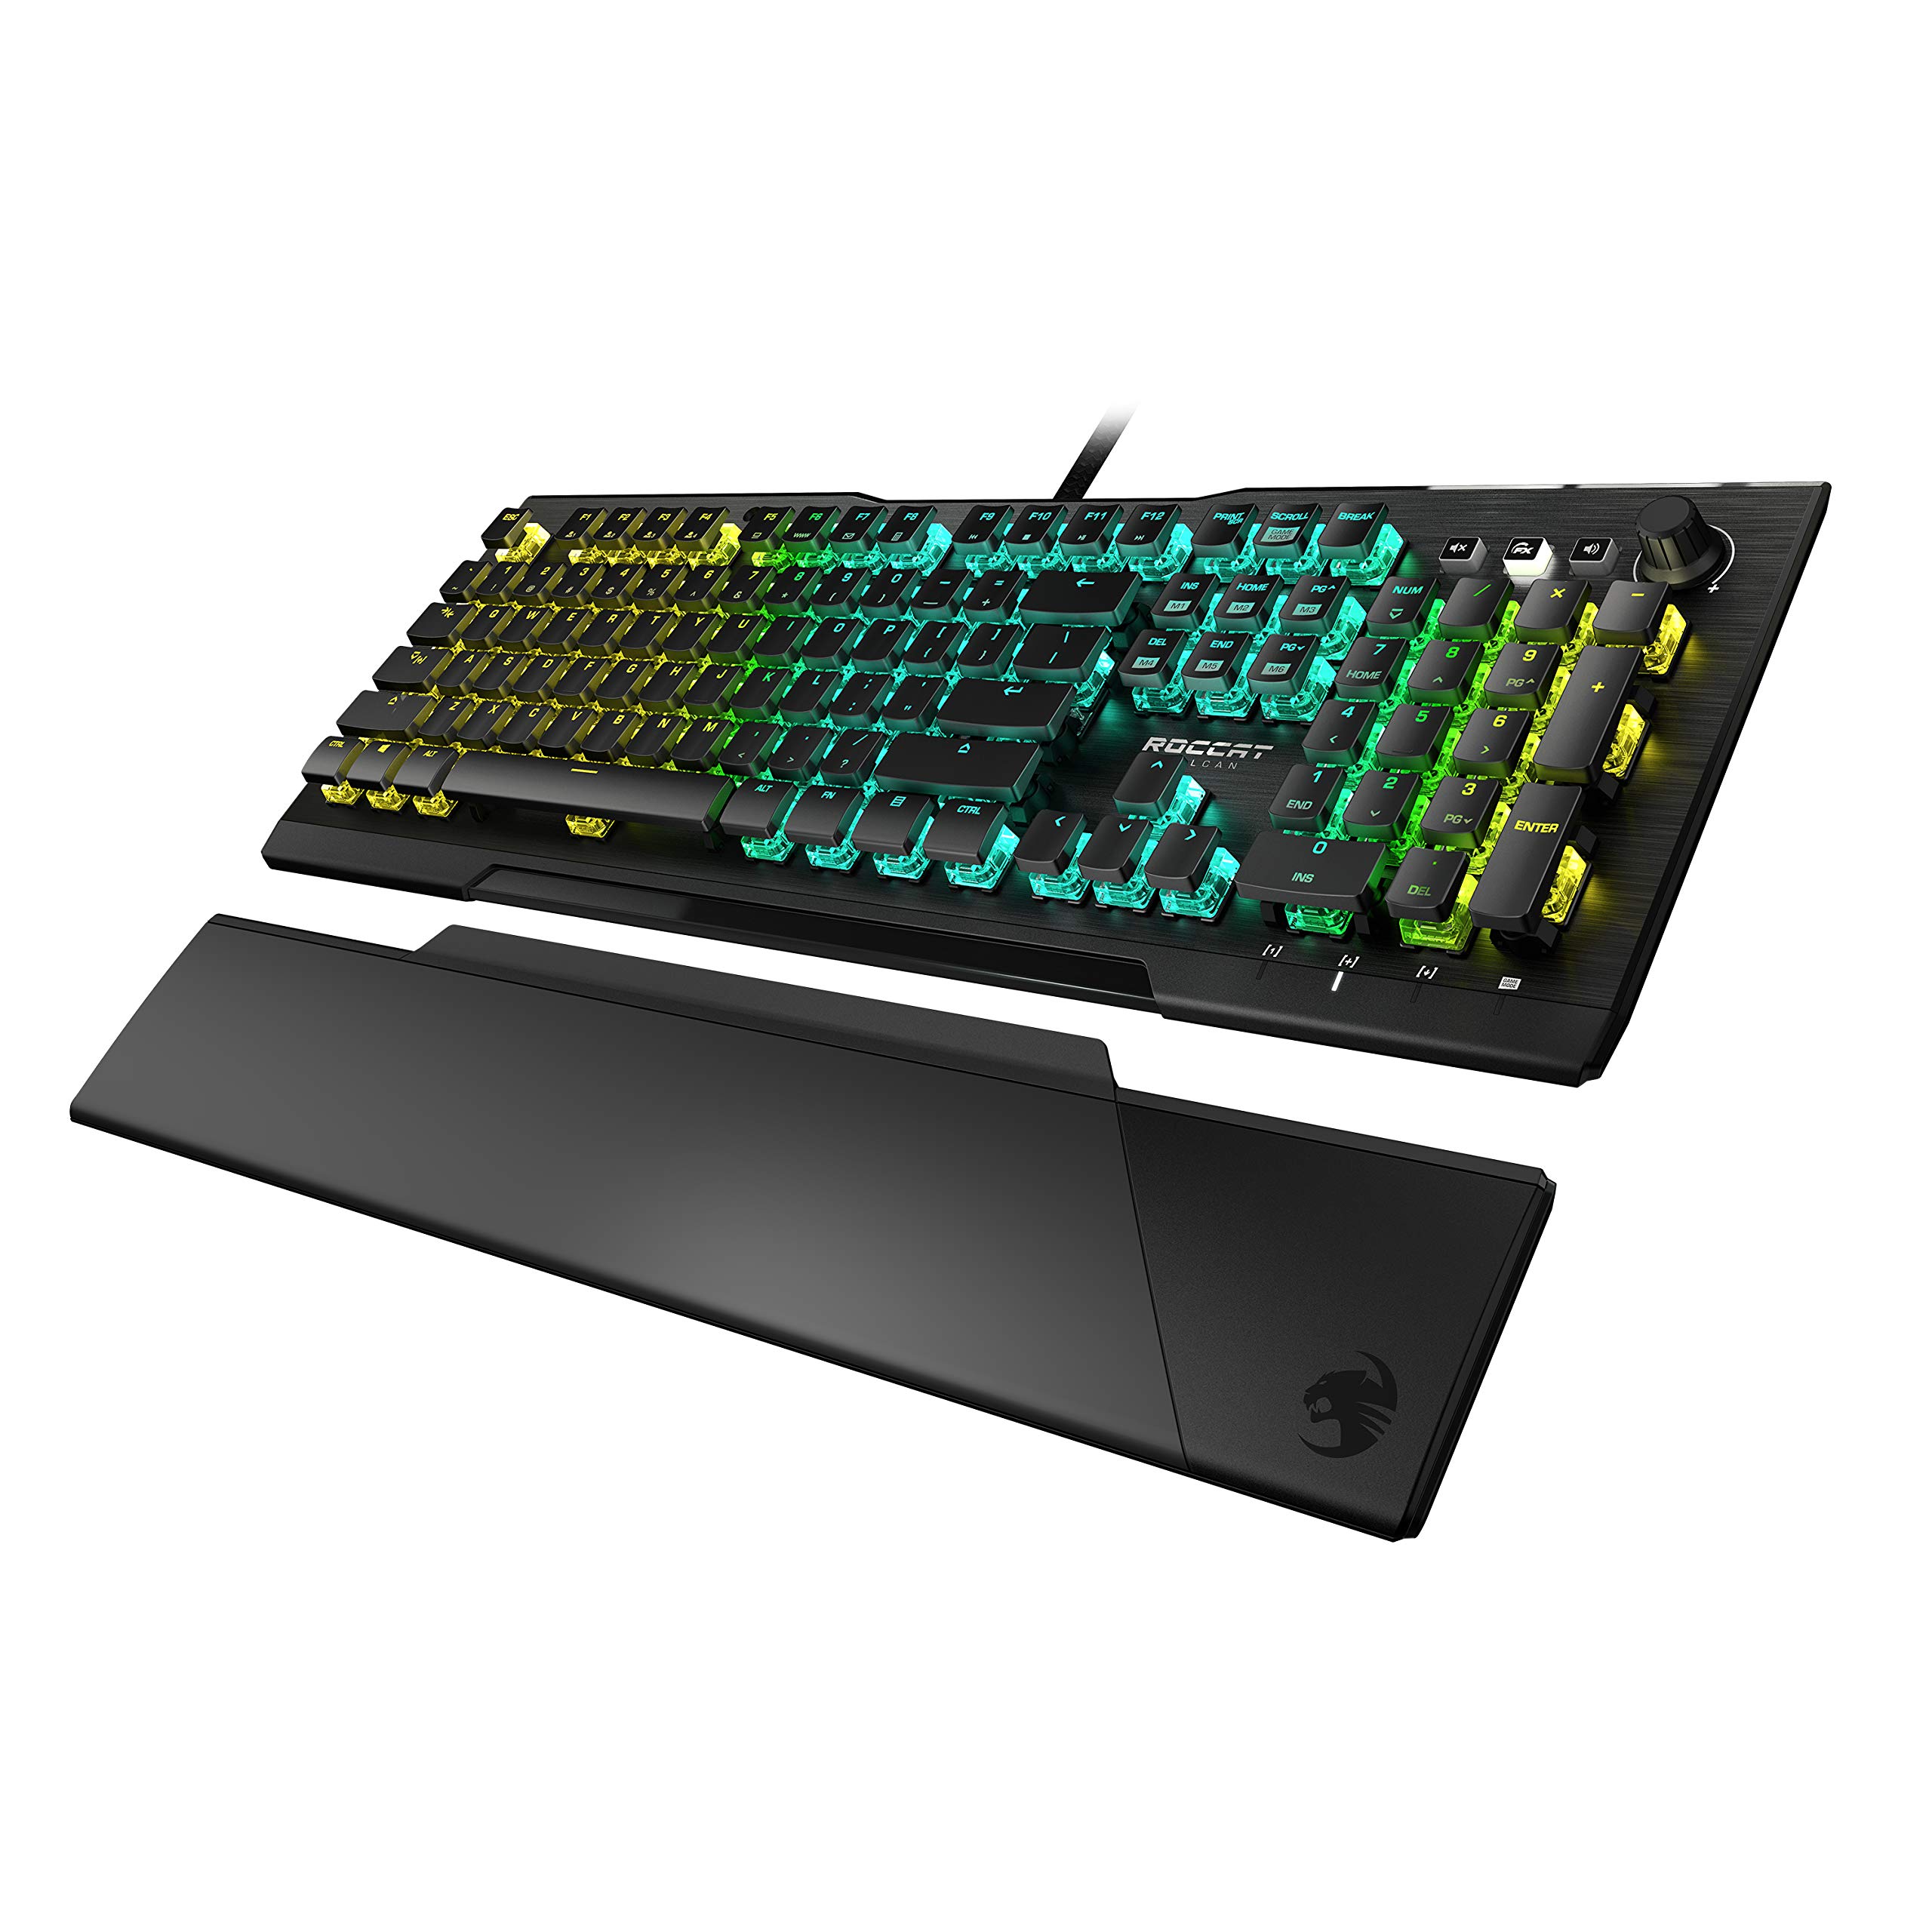 ROCCAT Vulcan Pro Linear Optical PC Gaming Keyboard, Titan Switch Full Size with Per Key AIMO RGB Lighting, Anodized Aluminum Top Plate and Detachable Palm/Wrist Rest, Low Profile, Black